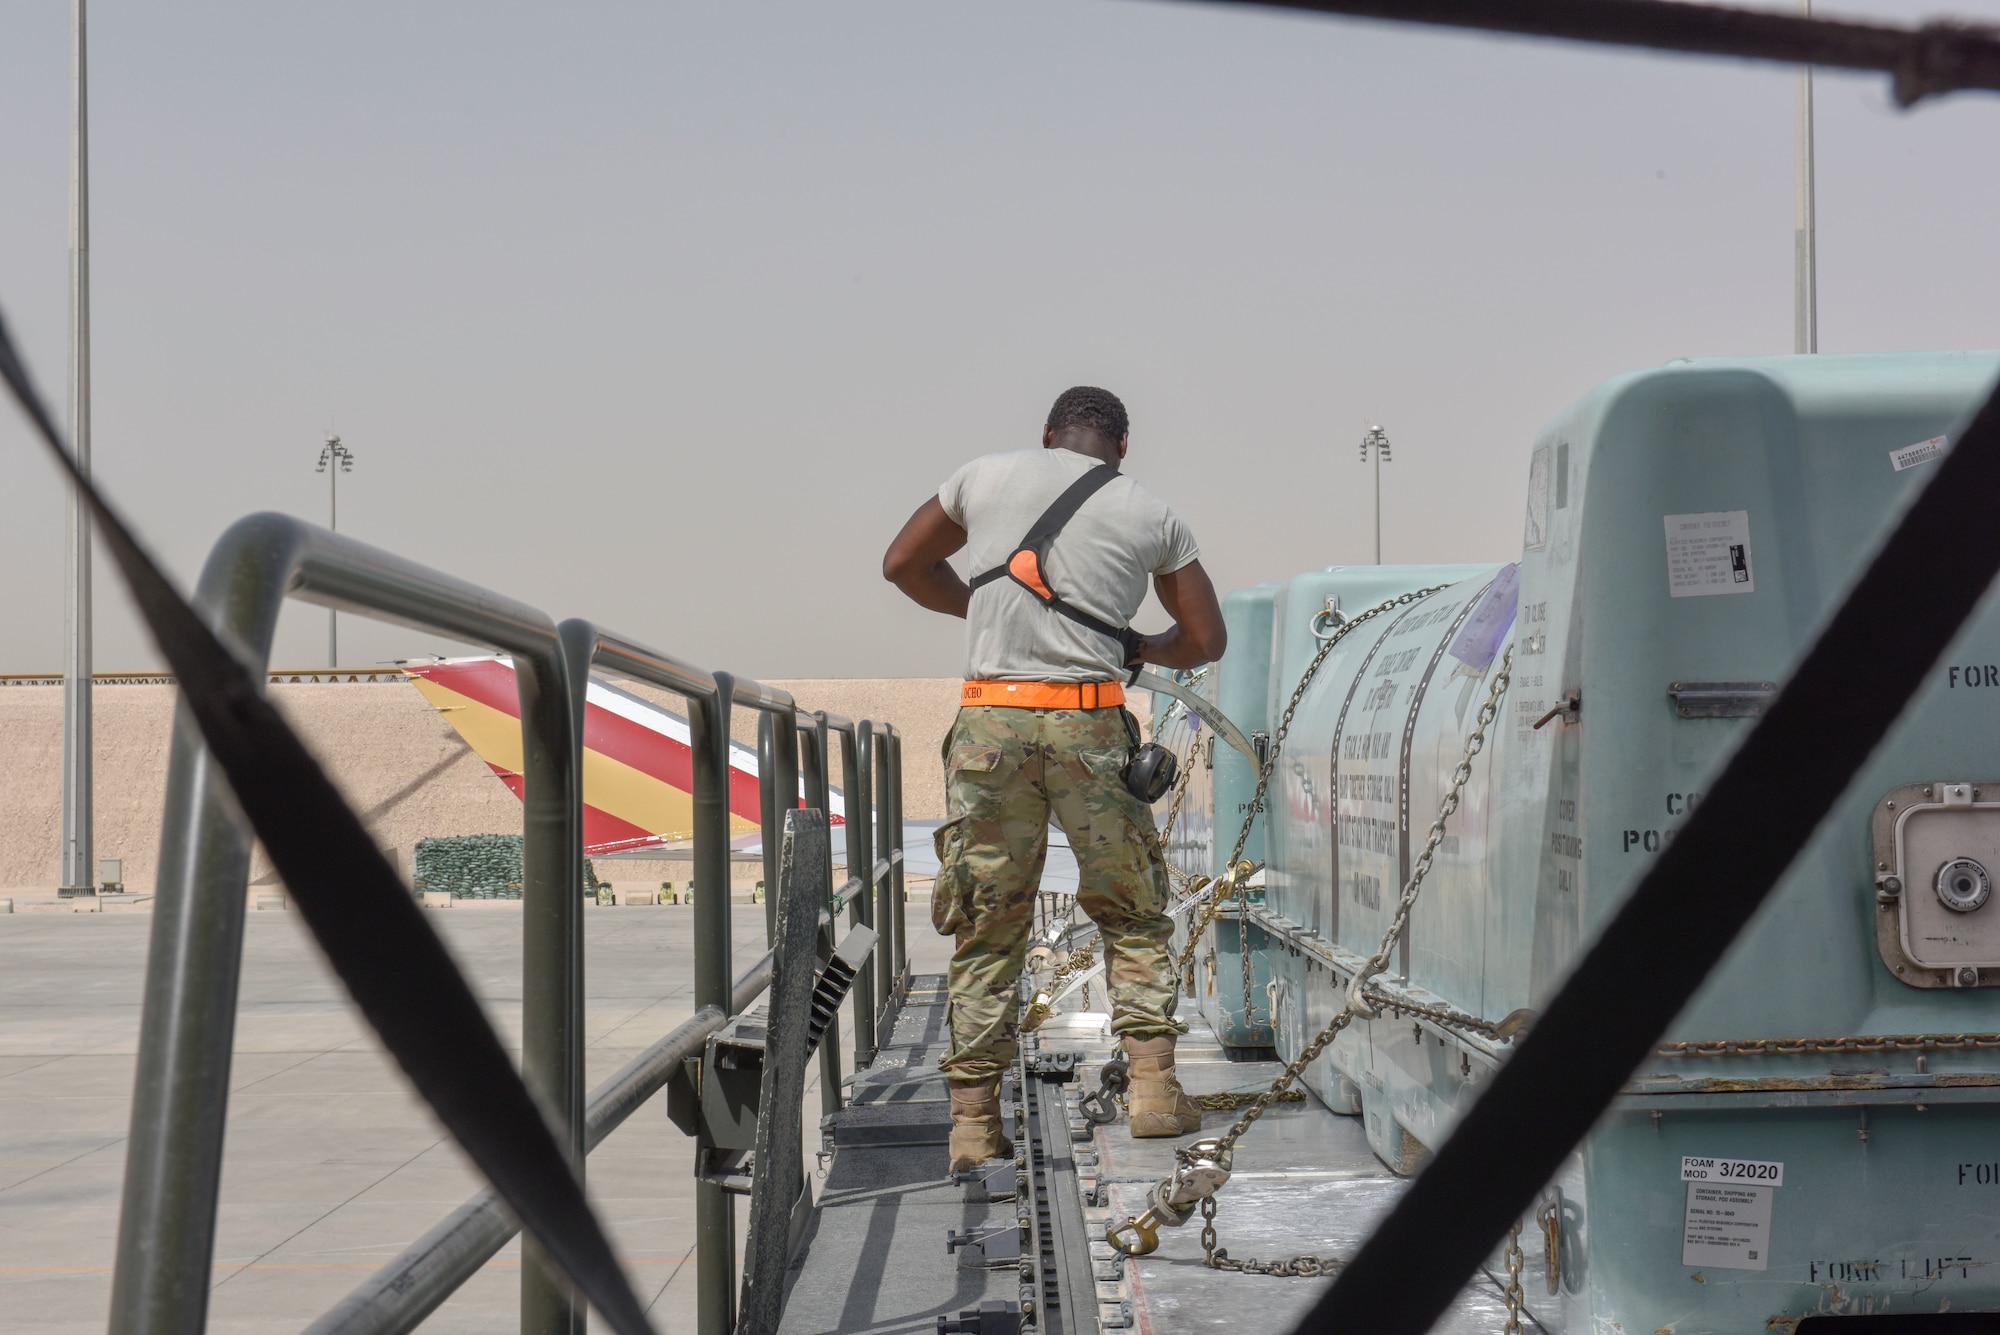 Airmen with the 8th Expeditionary Air Mobility Squadron move cargo on the flightline at Al Udeid Air Base, Qatar on April 28, 2020. The 8 EAMS Airmen support dozens of missions per day, often moving hundreds of thousands of pounds of cargo and service members around the U.S. Air Forces Central Command area of responsibility. (U.S. Air Force photo by Tech. Sgt. John Wilkes)